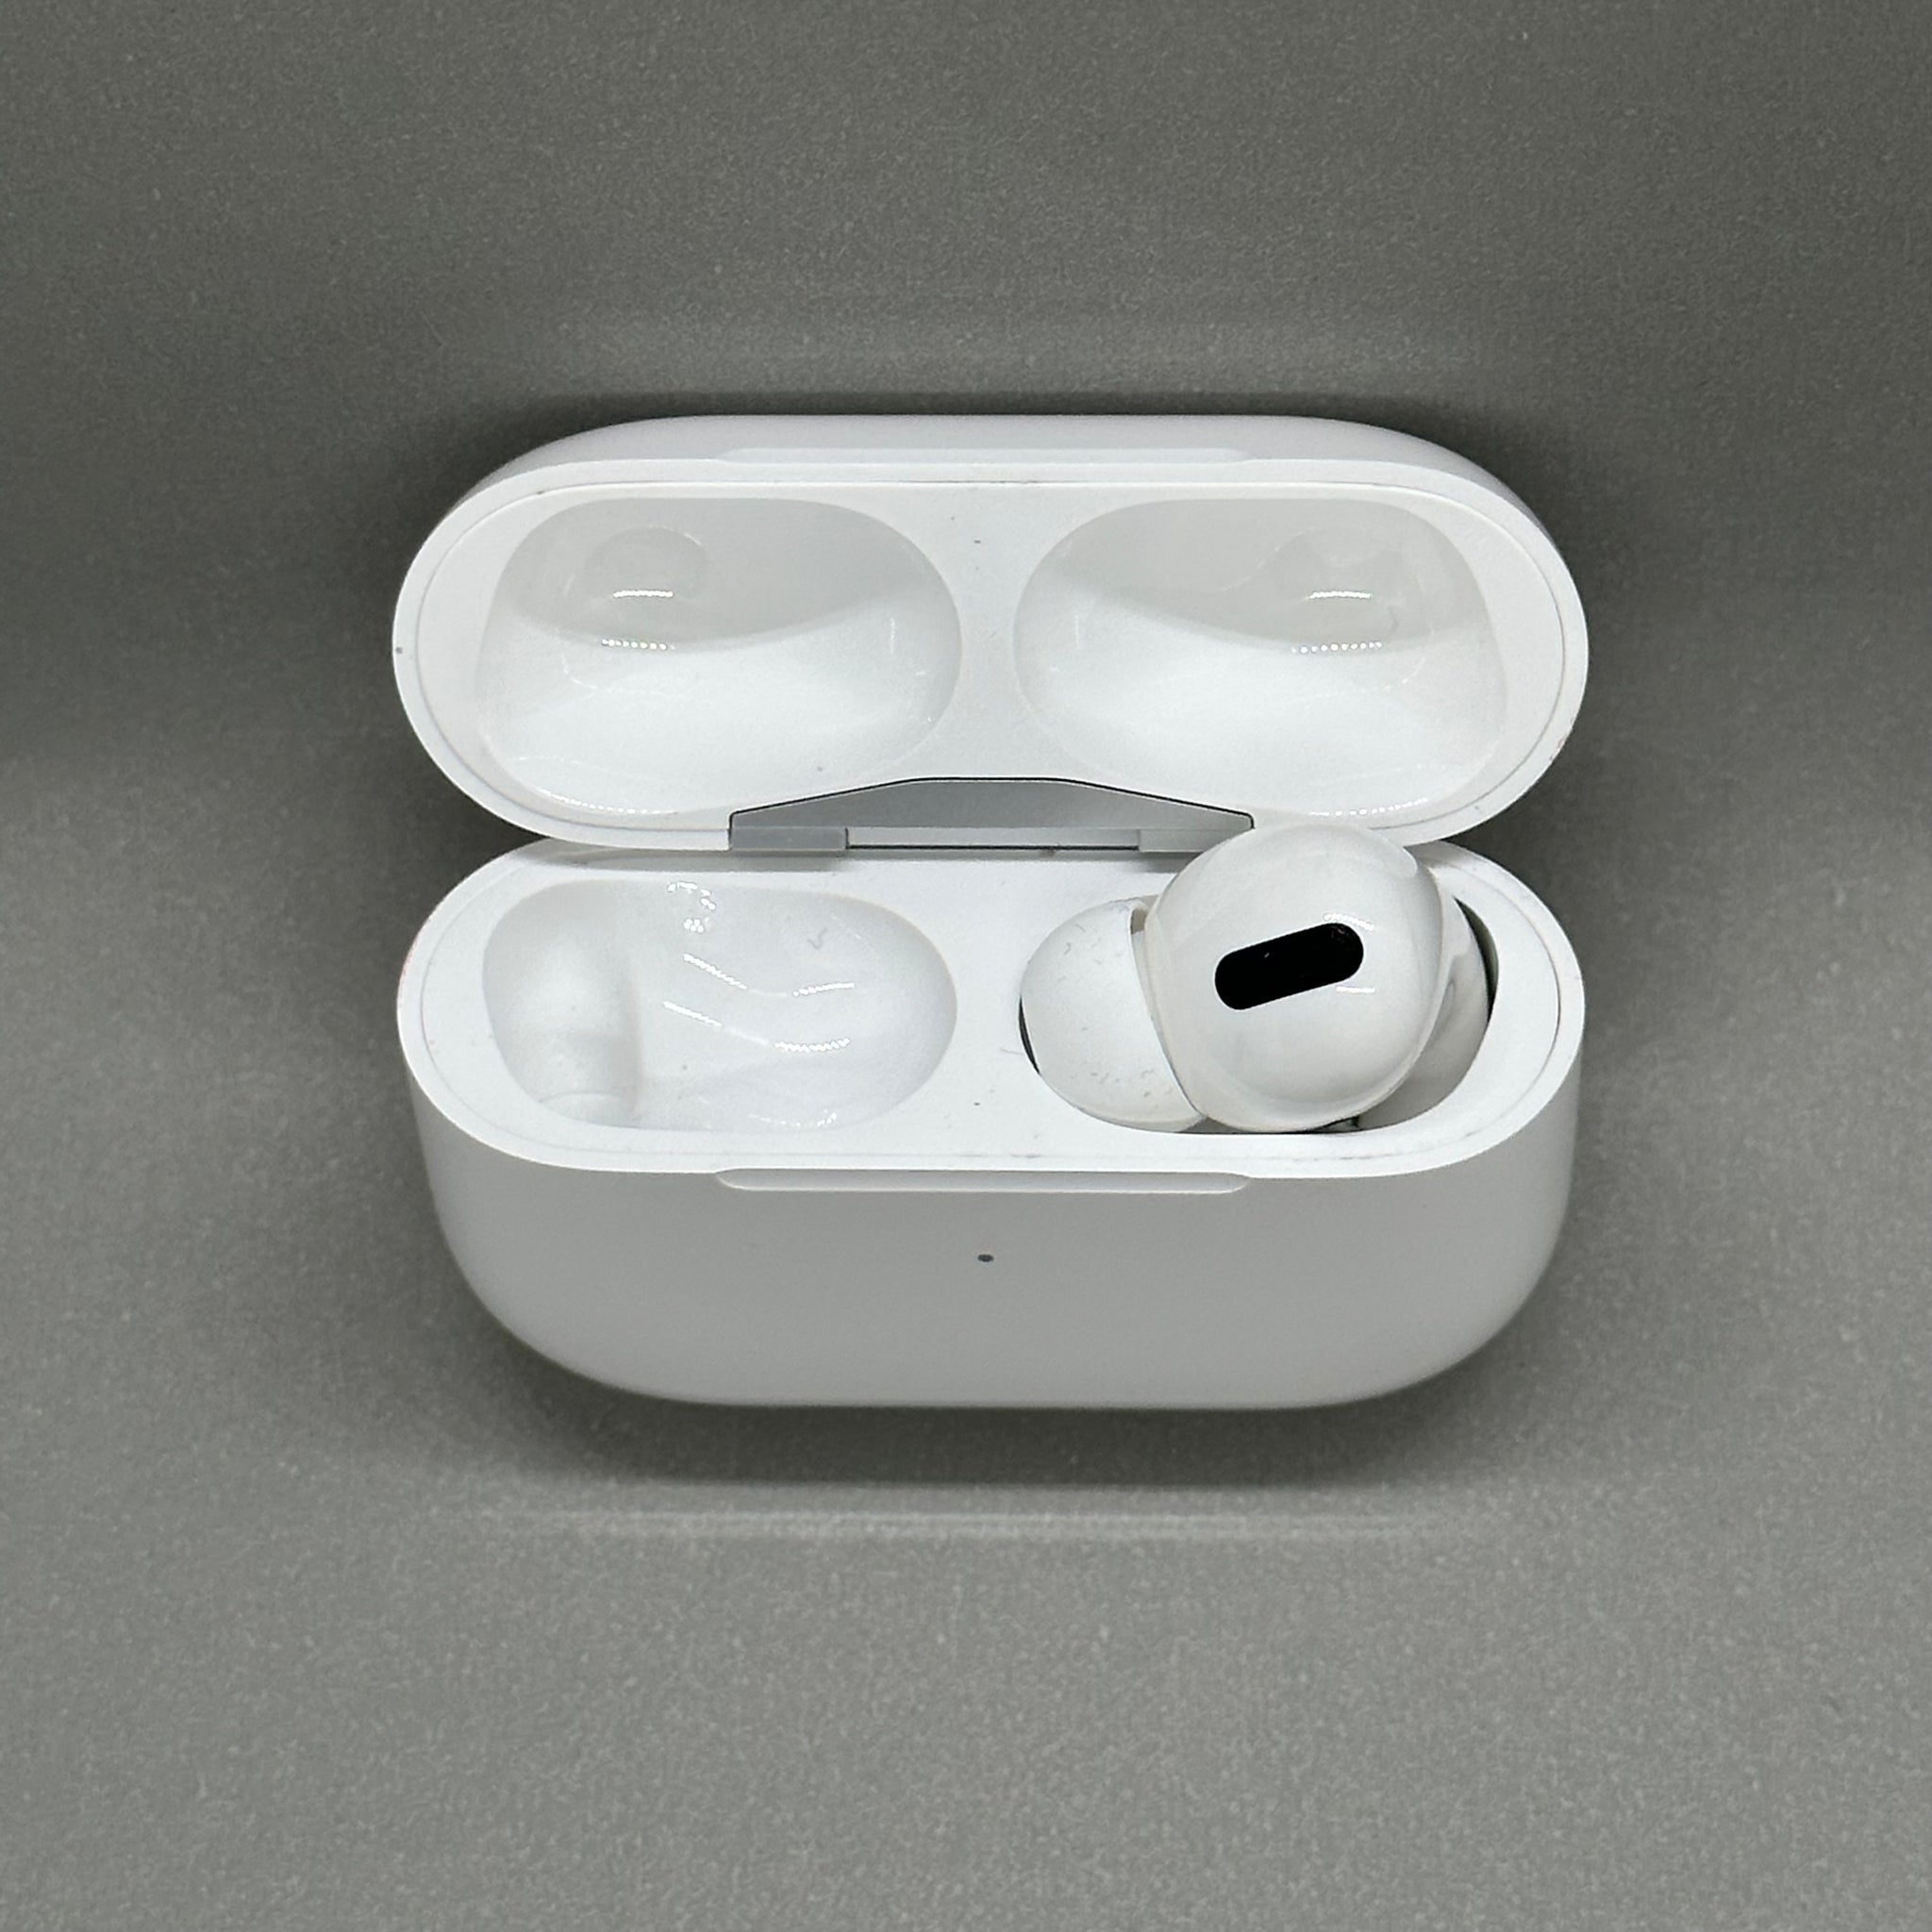 Lonely Right AirPod Pro in the Charging Case